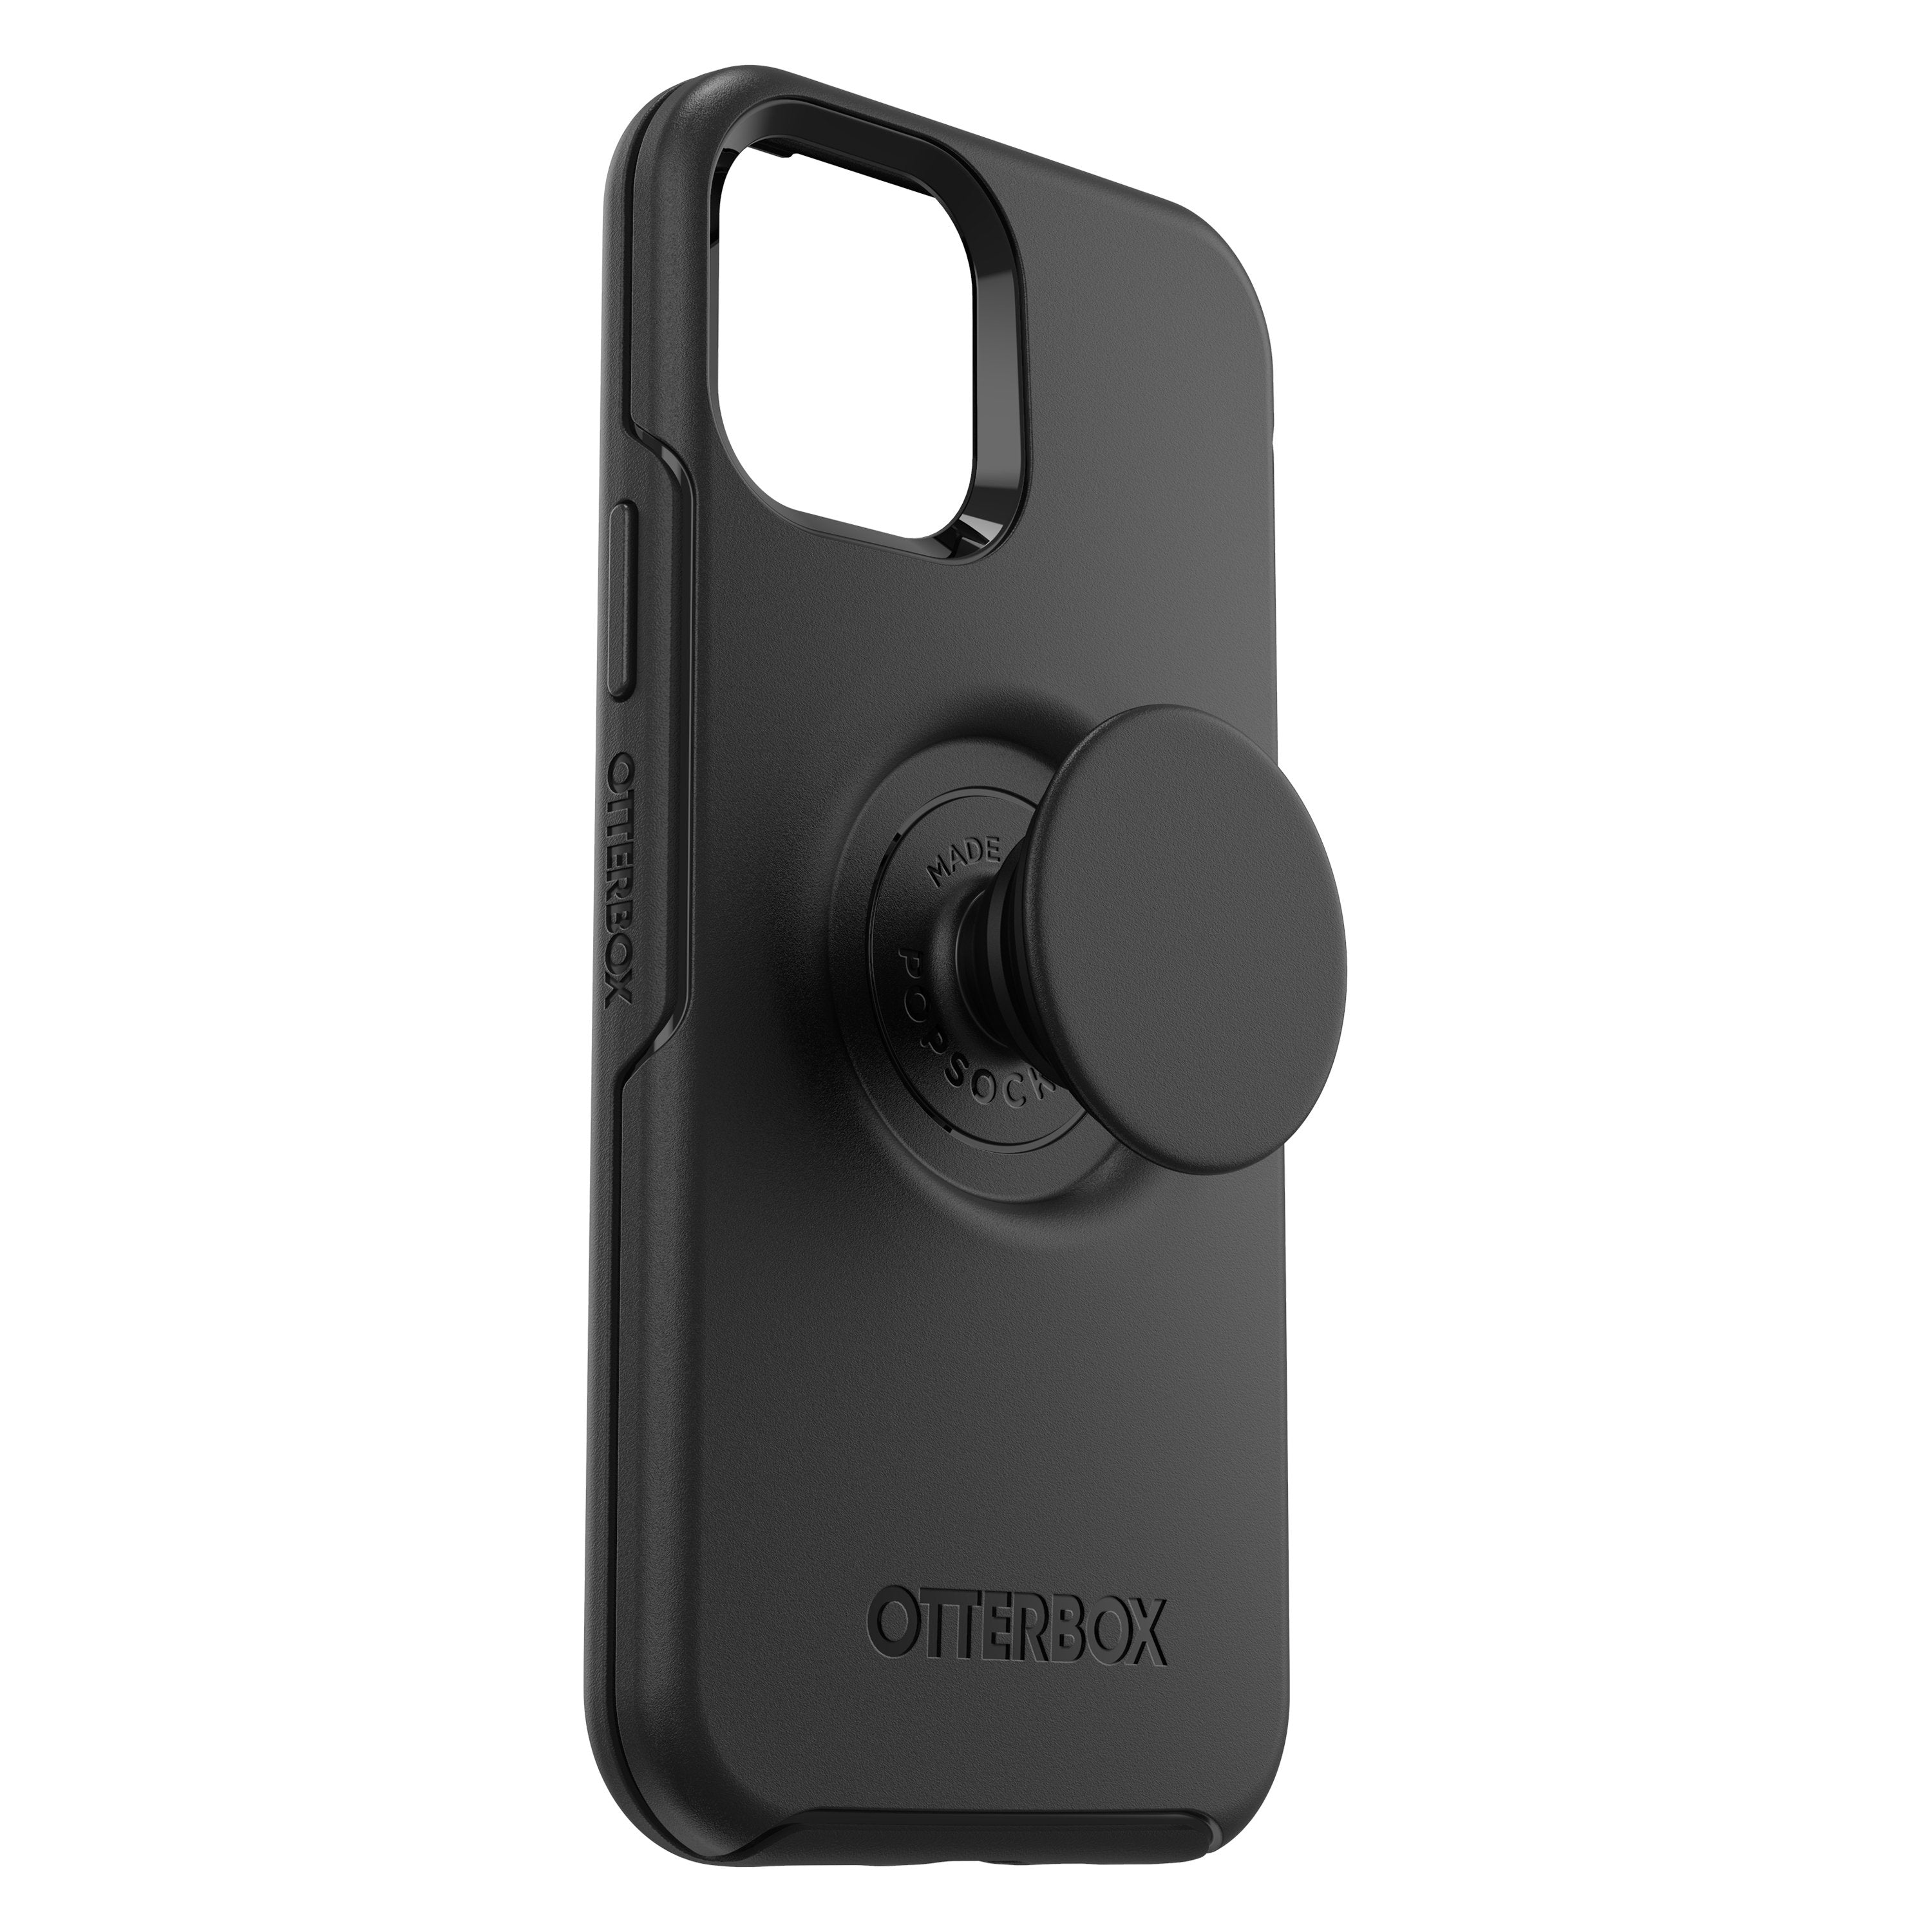 OtterBox OTTER+POP SYMMETRY Apple iPhone 12 / 12 Pro case - Drop Protection Cover w/ PopSocket Phone Holder, Slim Protective Selfie Case, Wireless Charging Compatible - Black